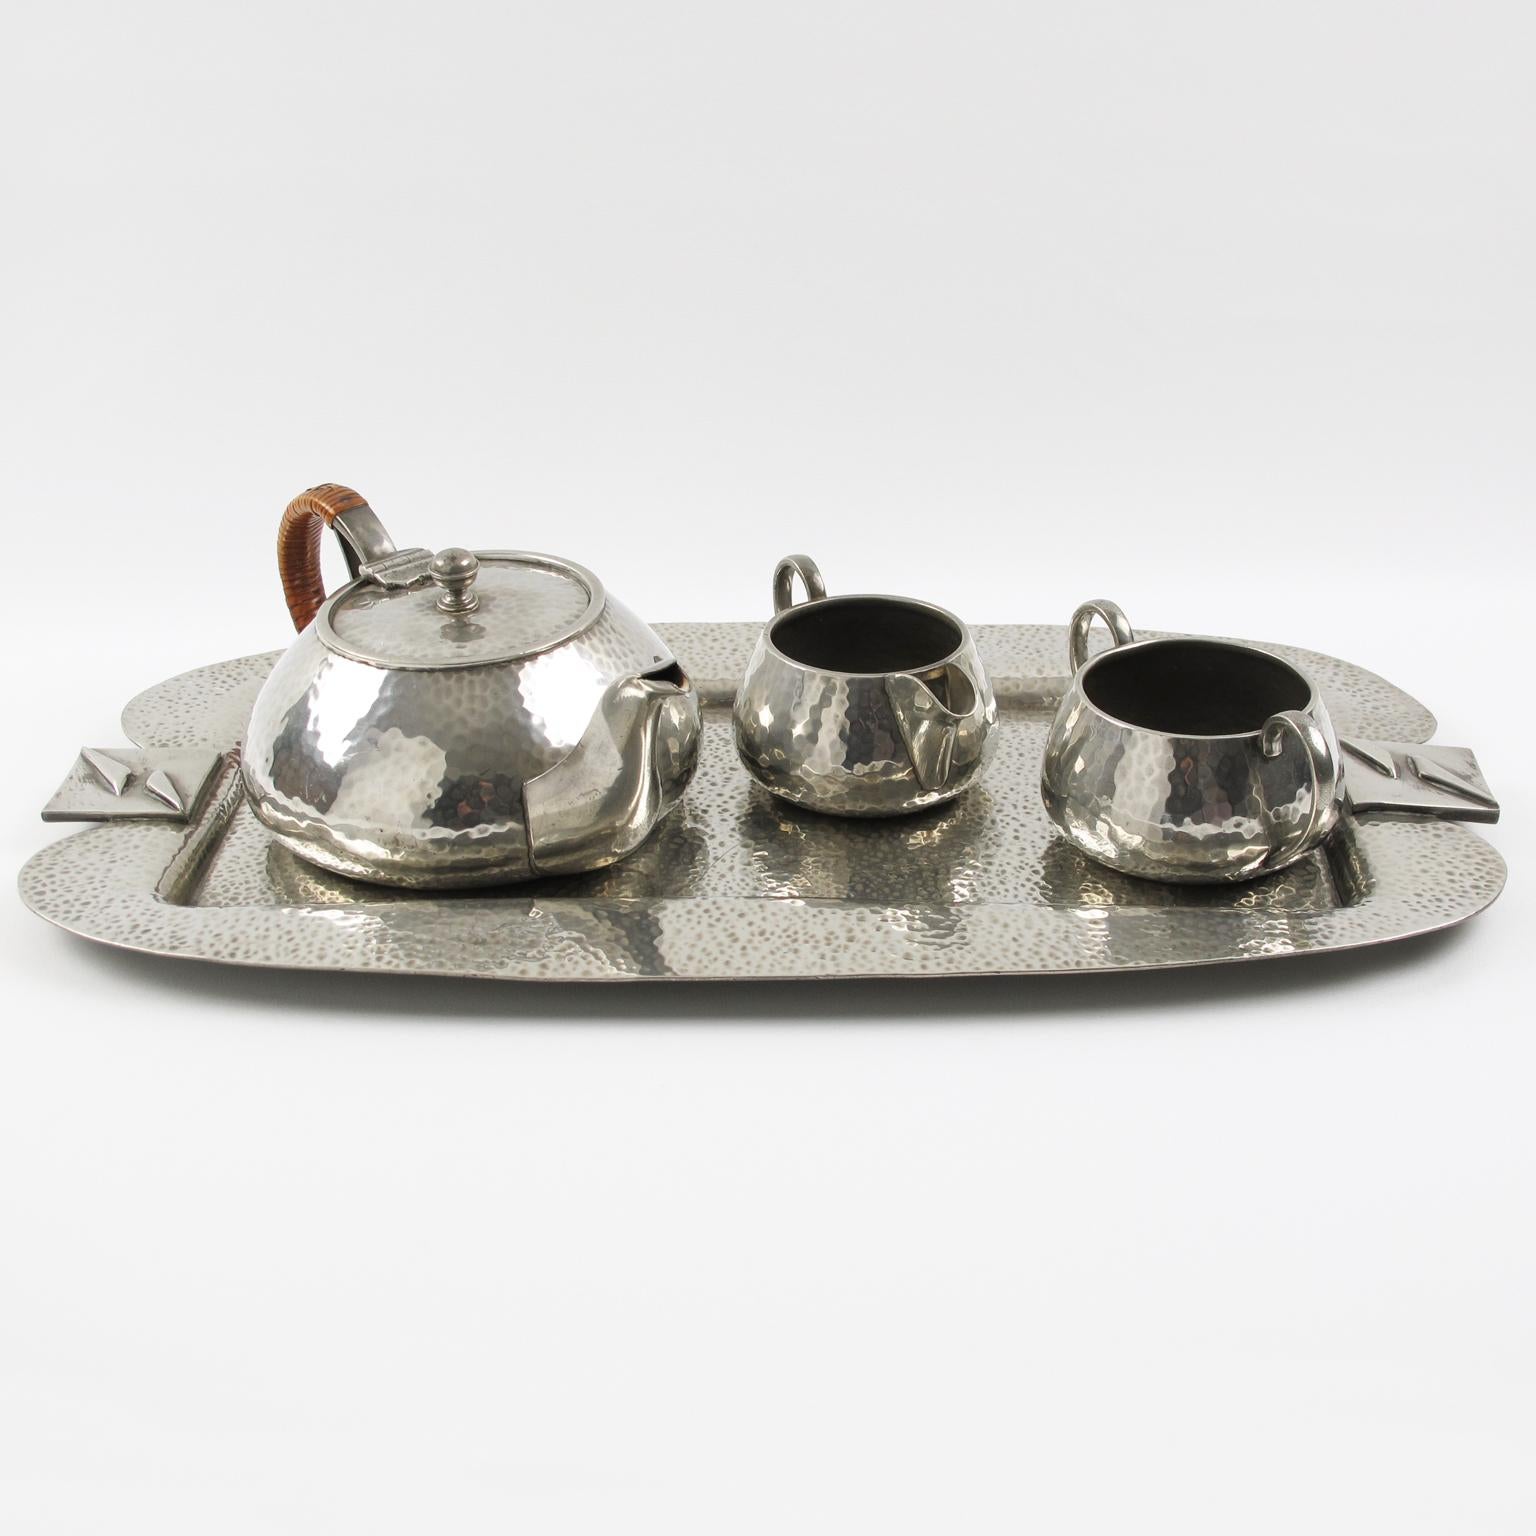 Refine English Art Nouveau polished pewter tea or coffee serving set with tray by Fenton Bros Ltd, Sheffield. Set includes coffee or teapot with straw handle, sugar bowl, creamer, and large serving tray. The set is stamped underside of each piece: